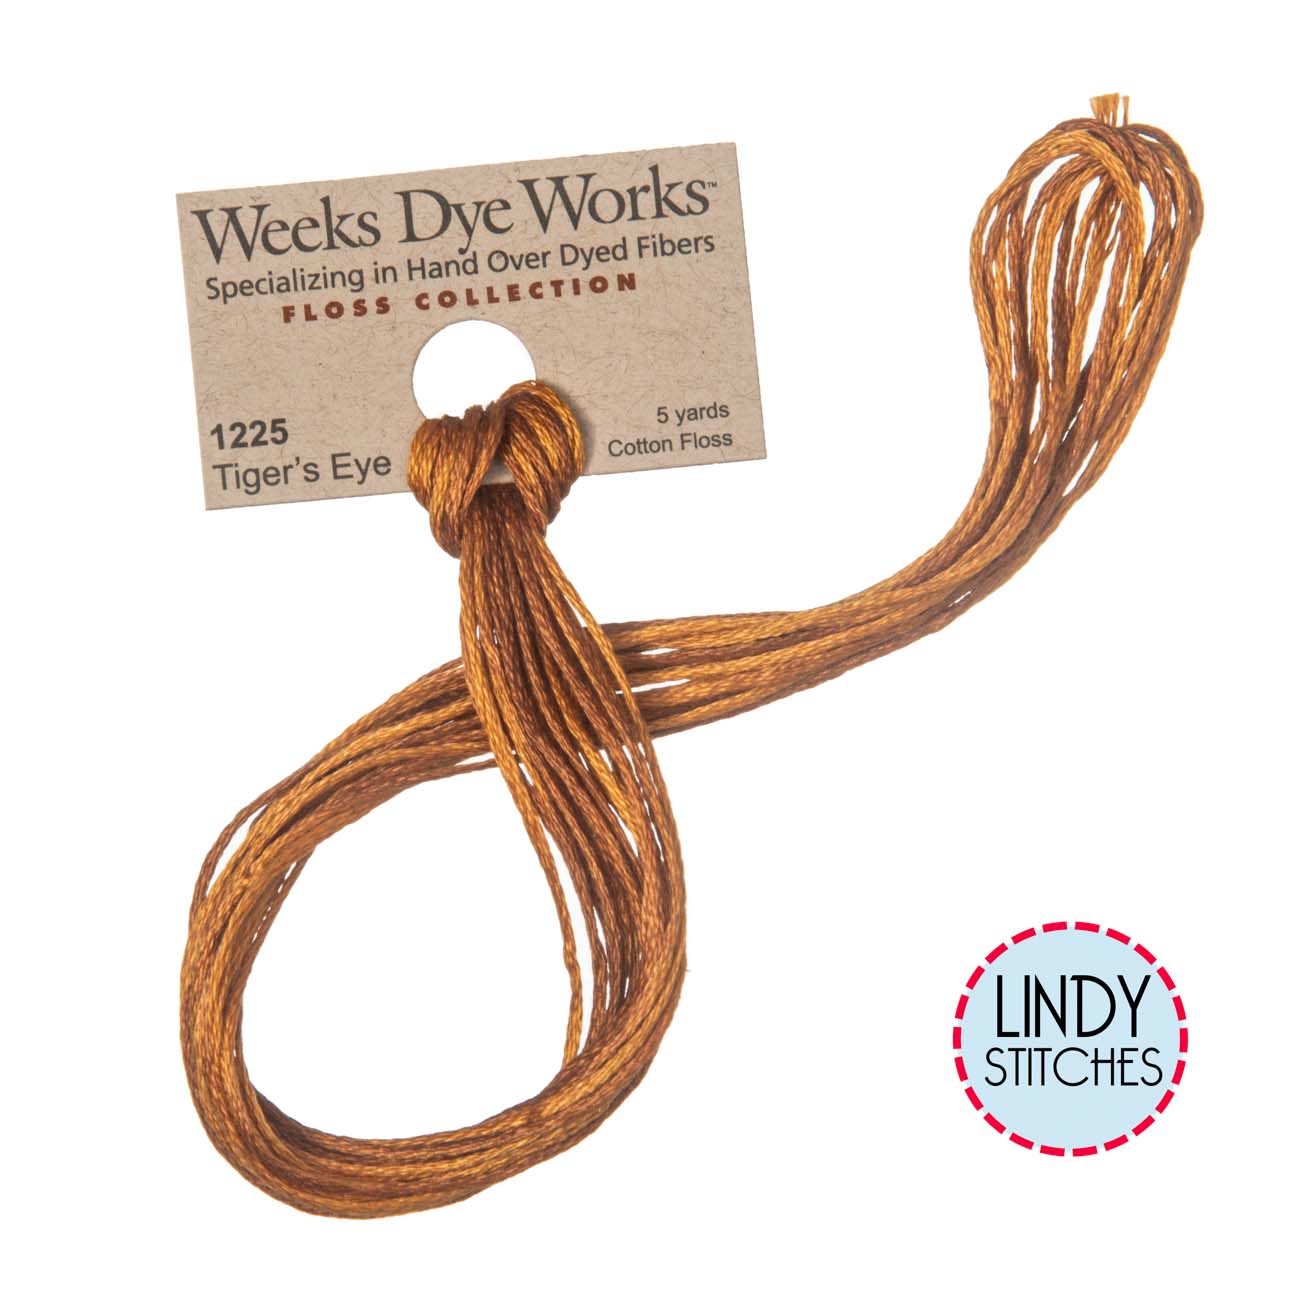 Tiger's Eye Weeks Dye Works Floss Hand Dyed Cotton Skein 1225